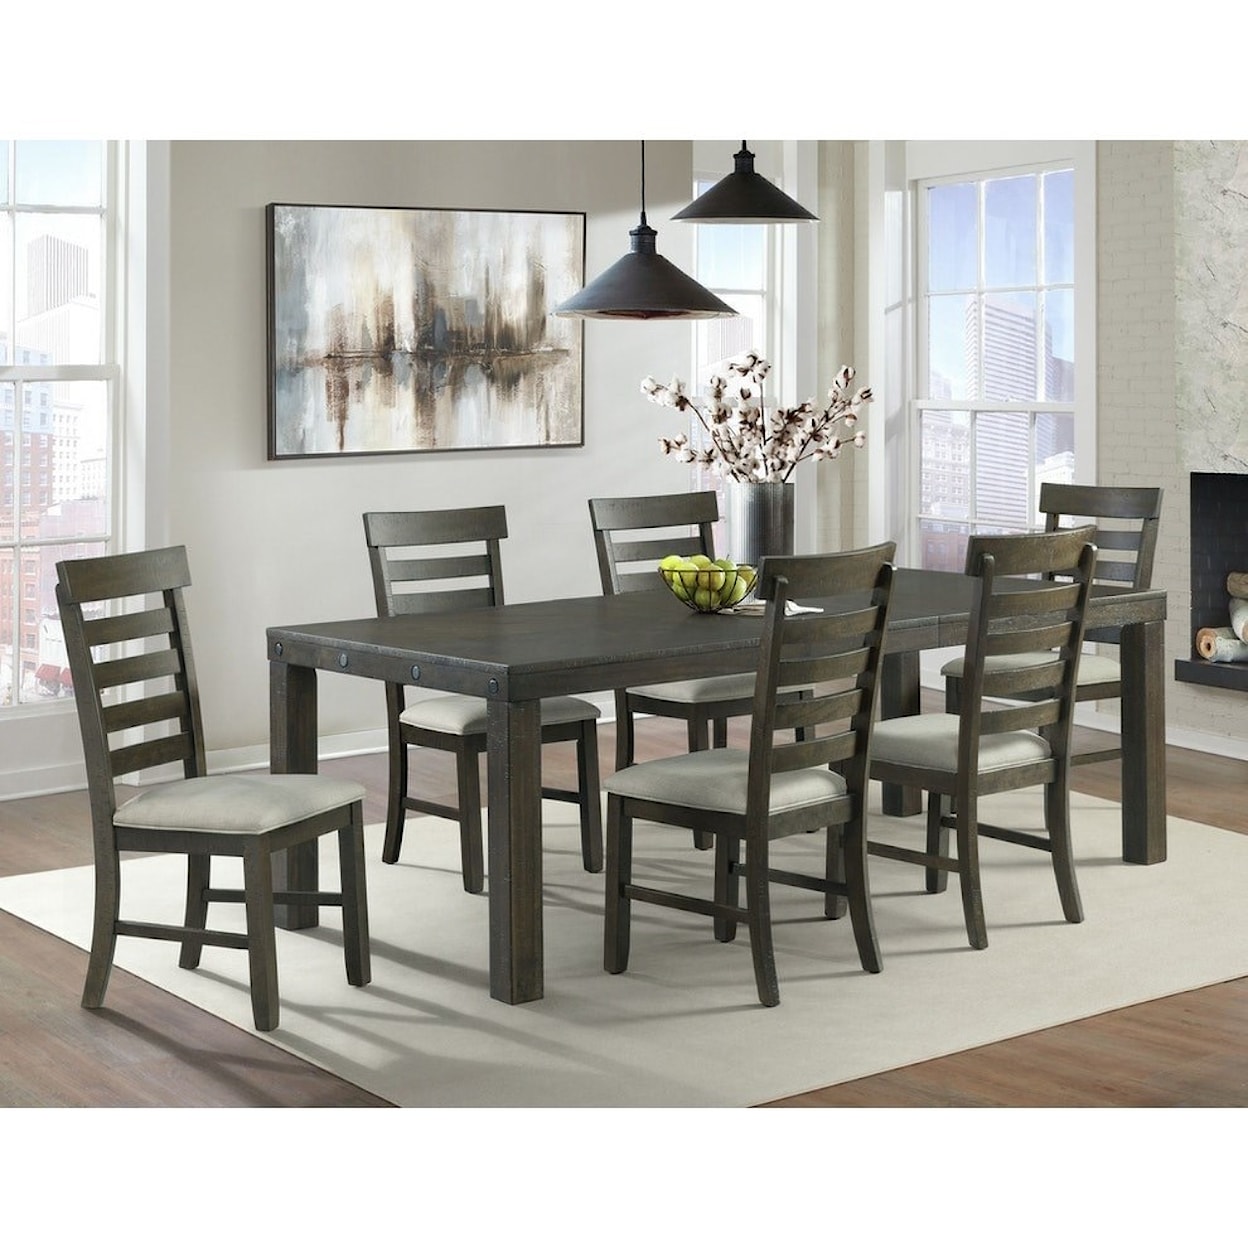 Elements Colorado 7-Piece Dining Table and Chair Set